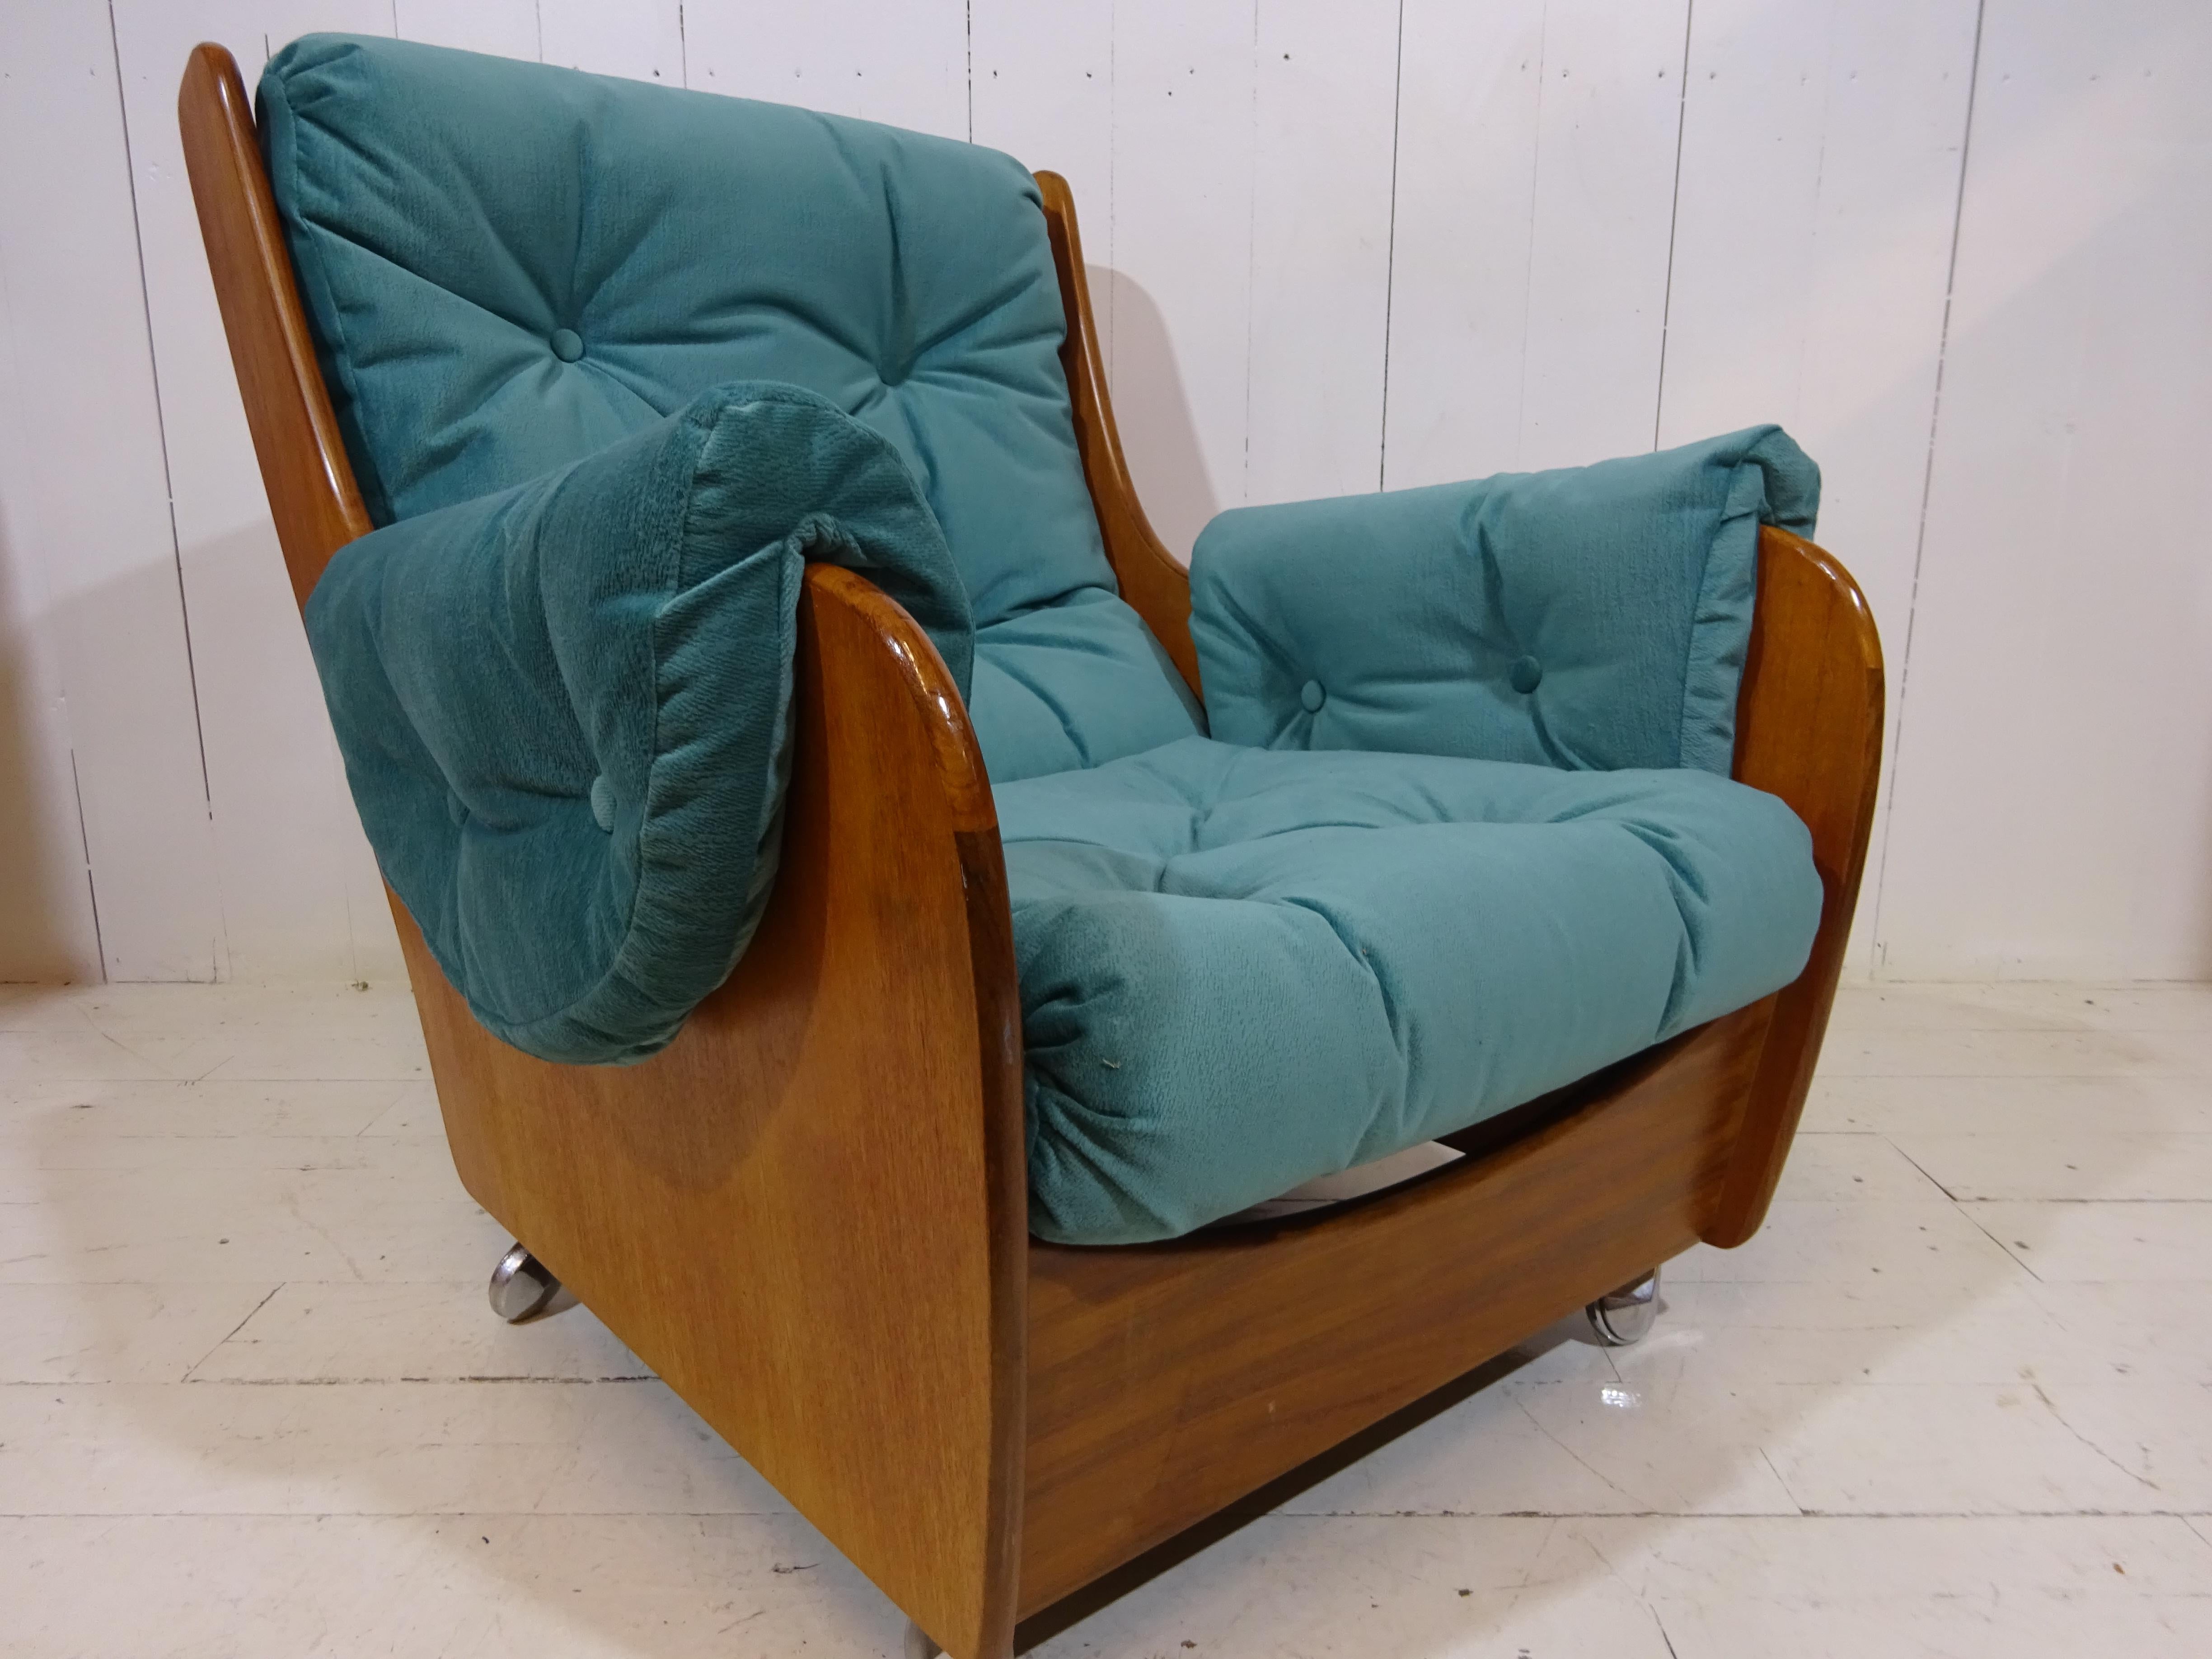 G plan armchair



Love the colour, fabric and textures on this chair. 



History



The company was founded in High Wycombe in 1898 by Ebeneezer Gomme,at first making hand-made chairs, and building a factory at Leigh Street in 1909. By